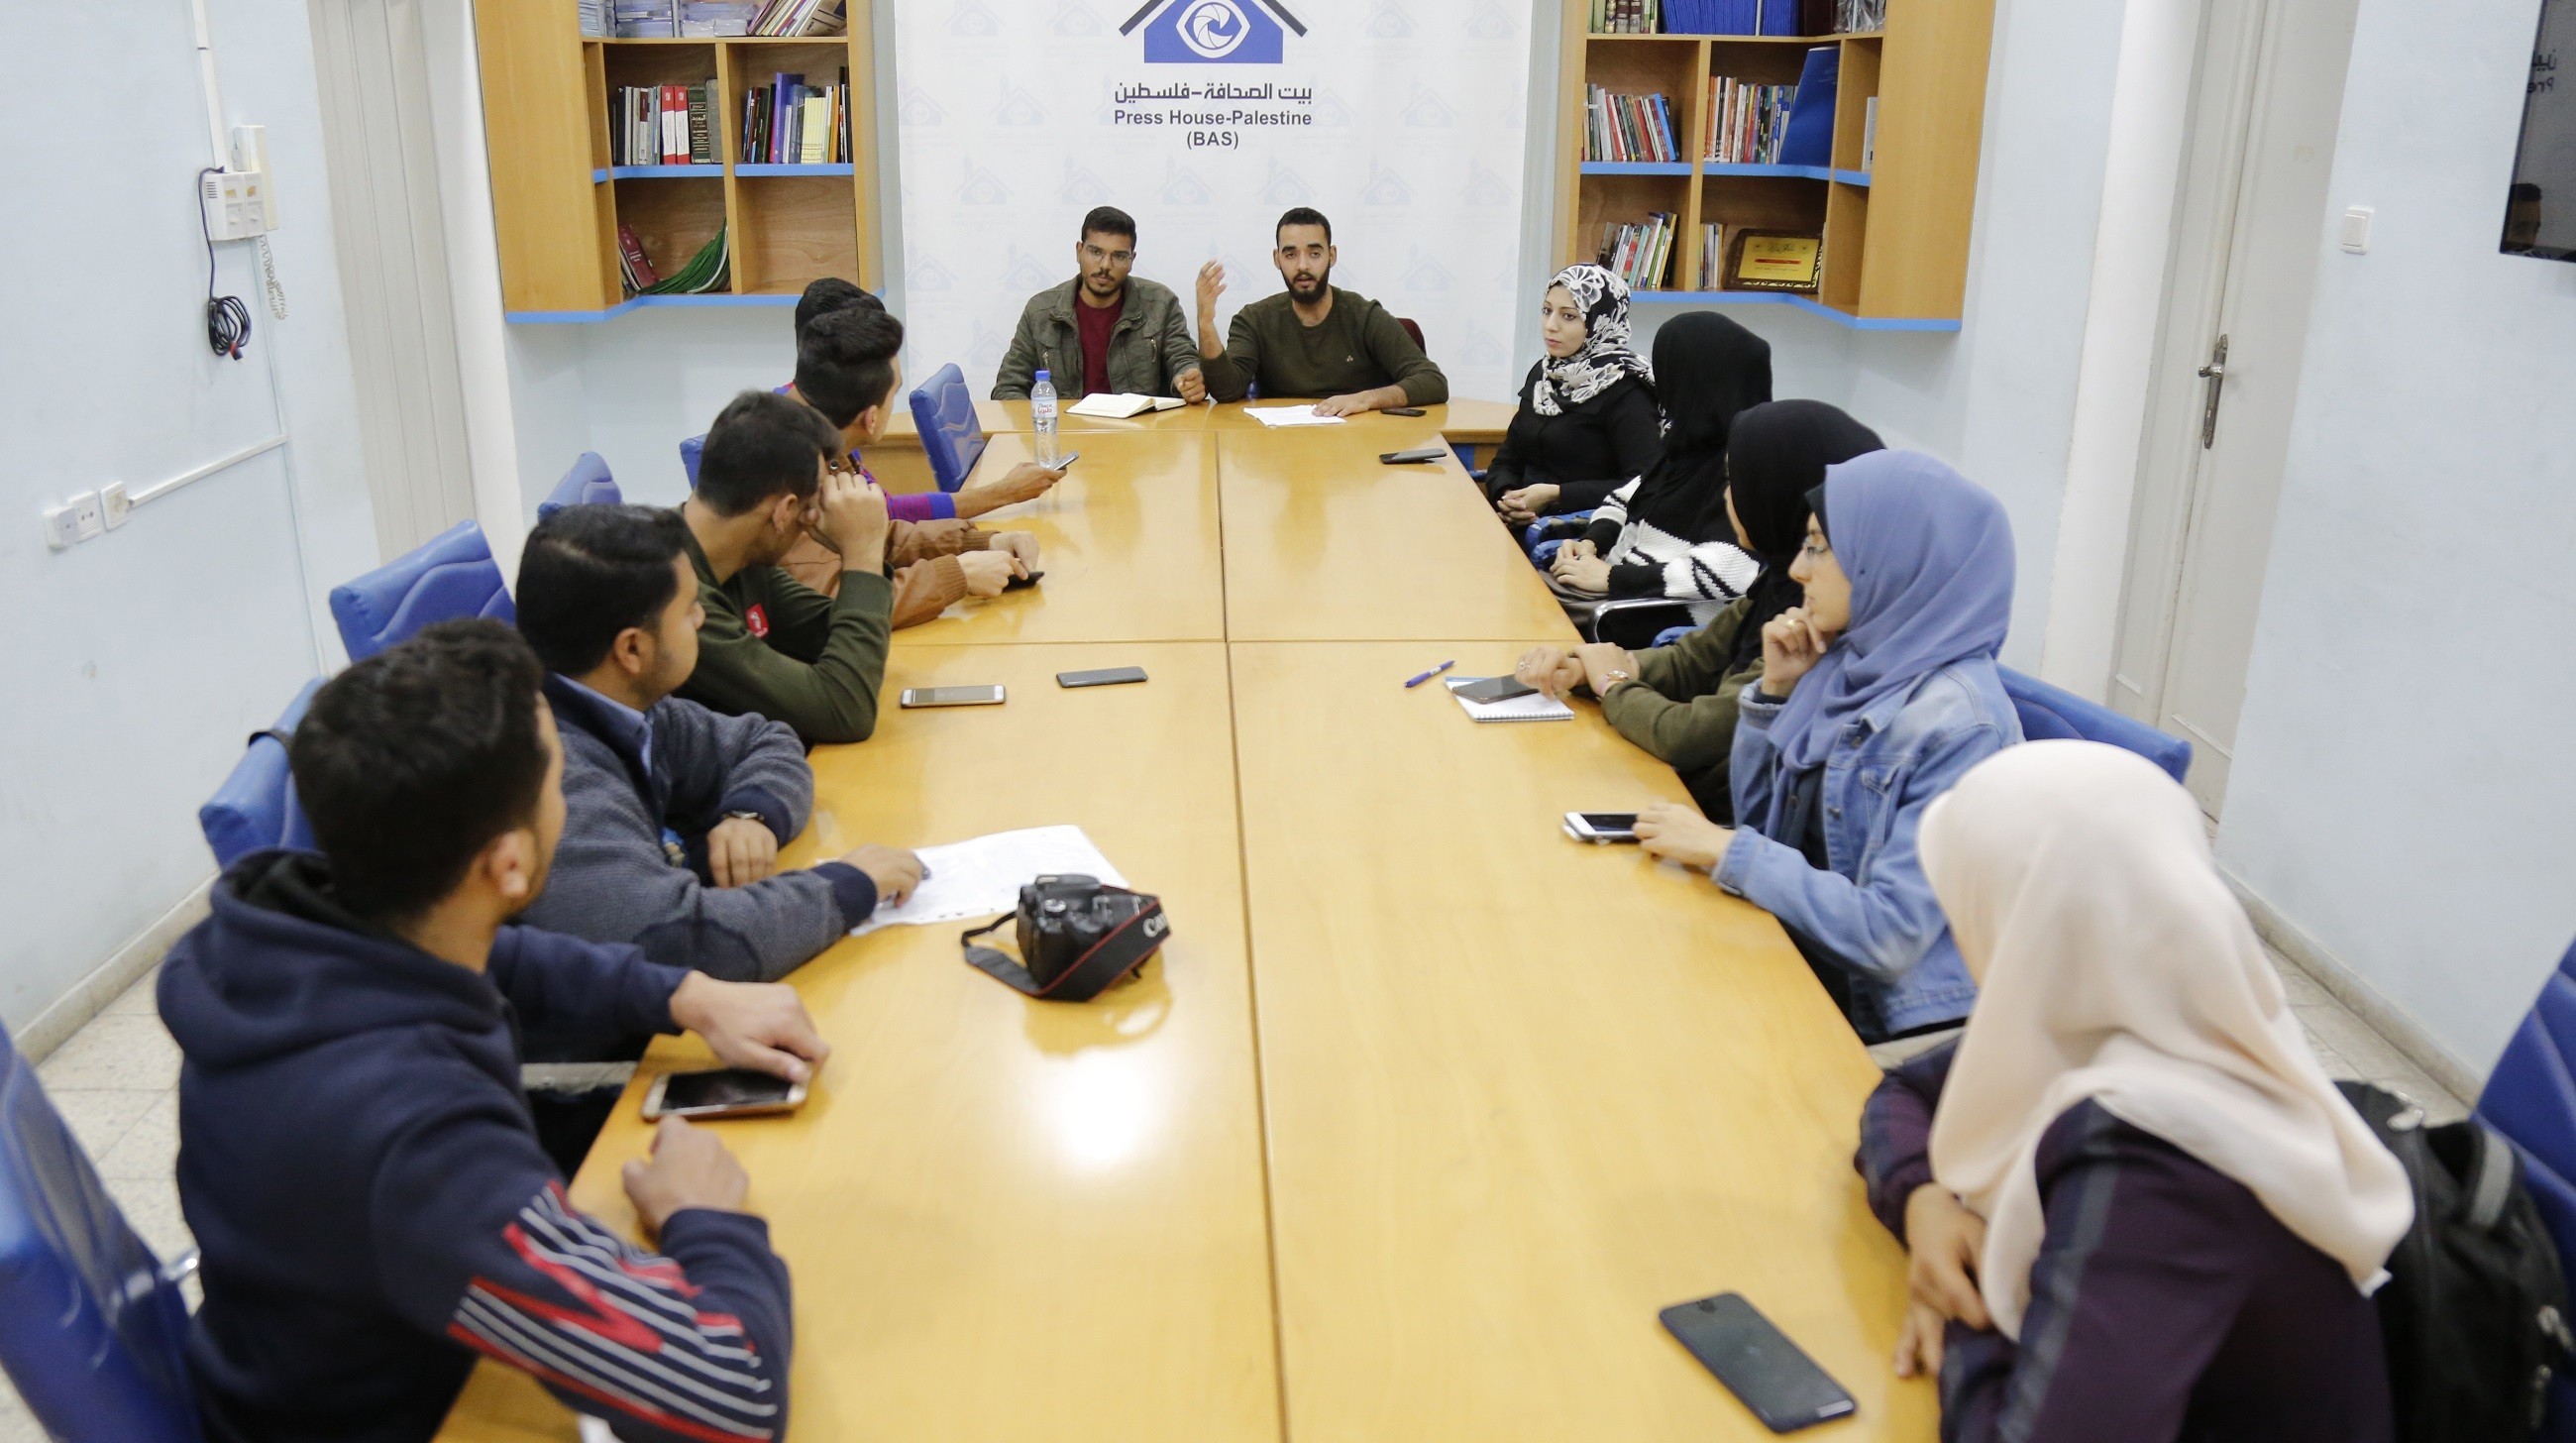 The Center for Civil Society Studies implements a focal group in cooperation with the Press House